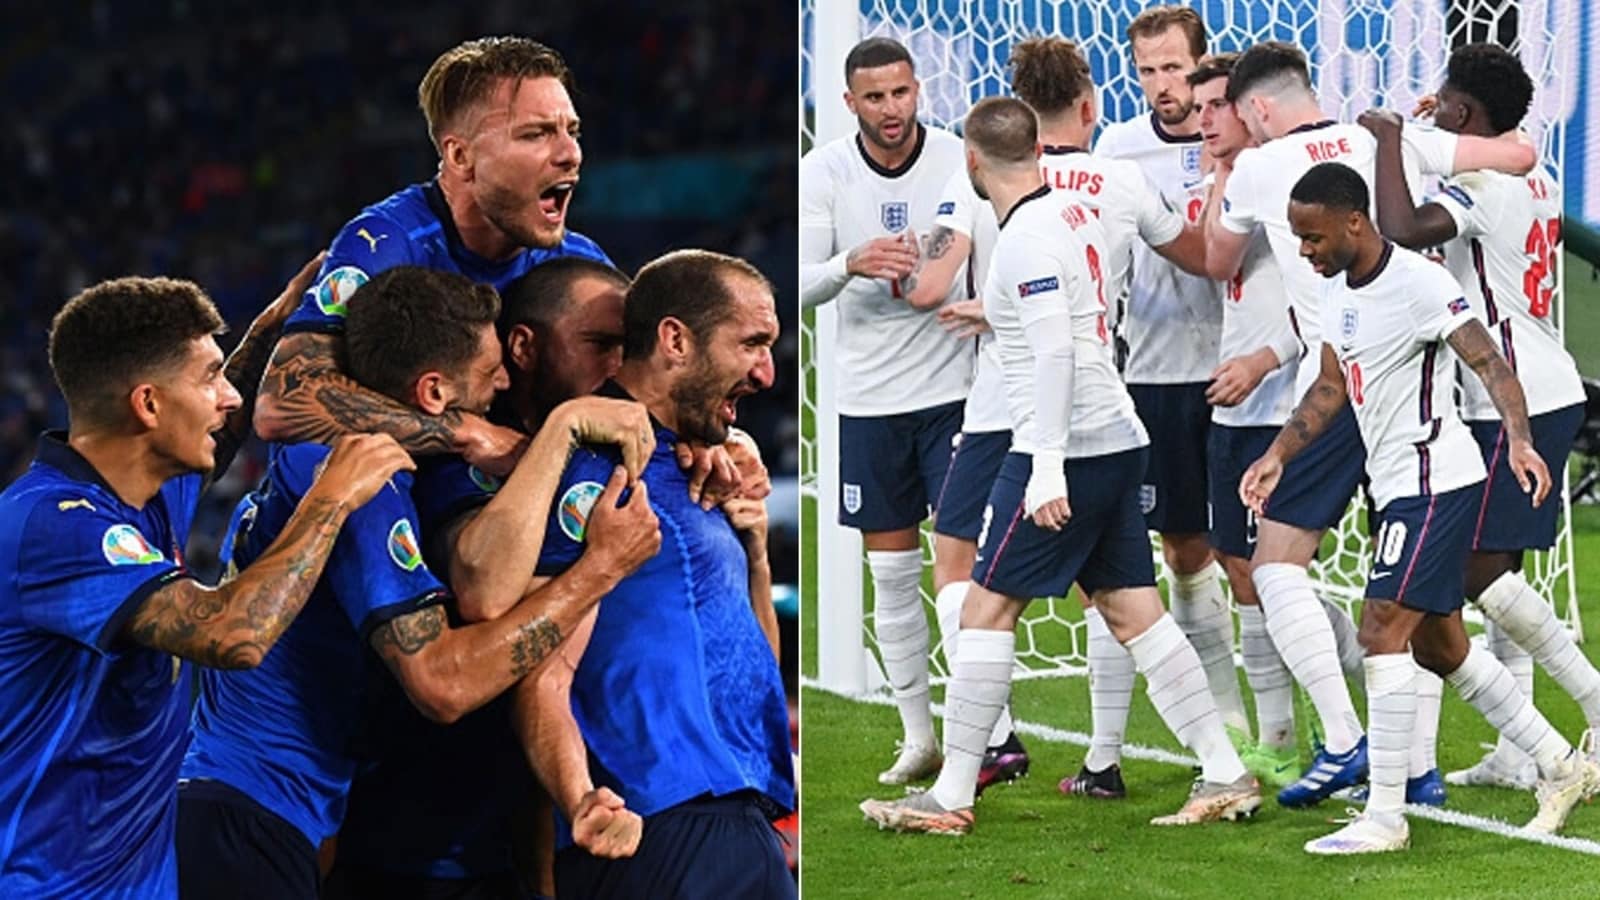 UEFA Euro 2020 Final Live Streaming Italy vs England: When and where to watch the final on TV and online